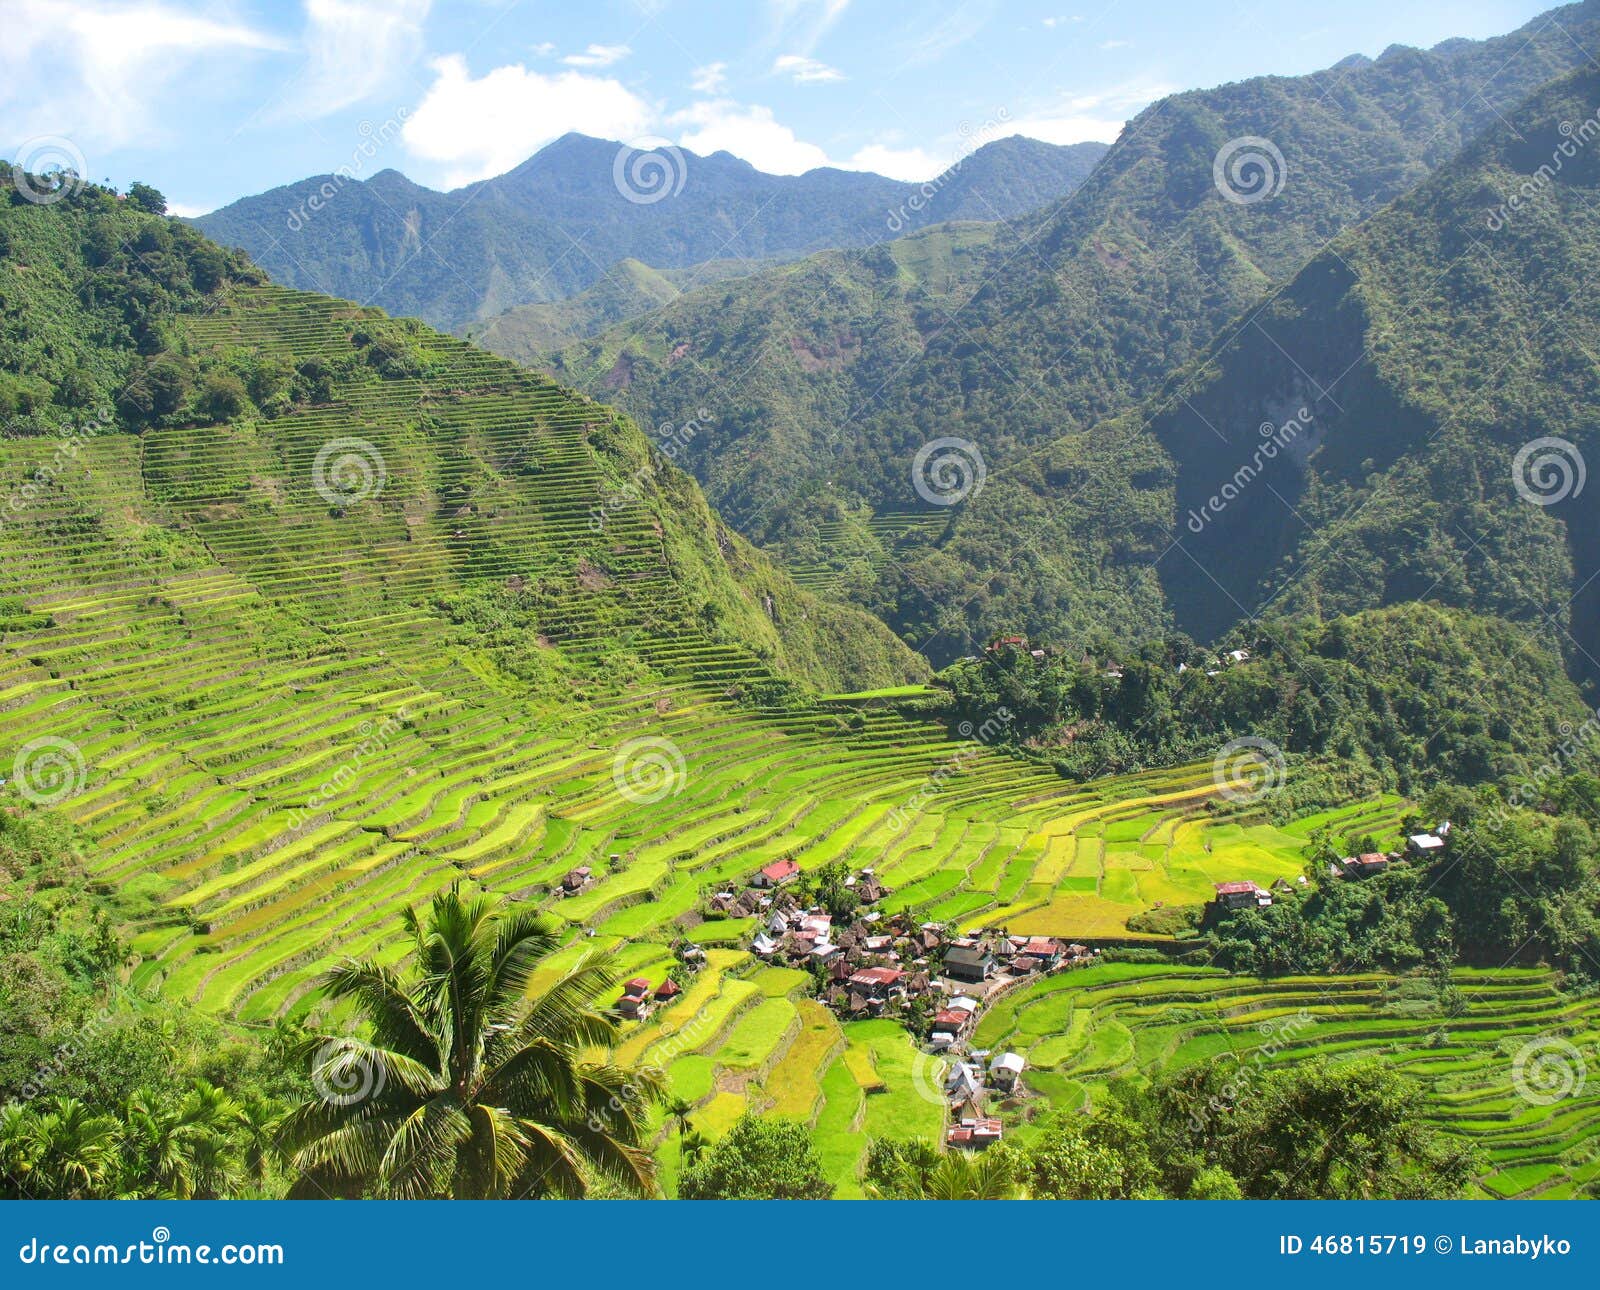 rice paddies in the north of luzon island, philippines